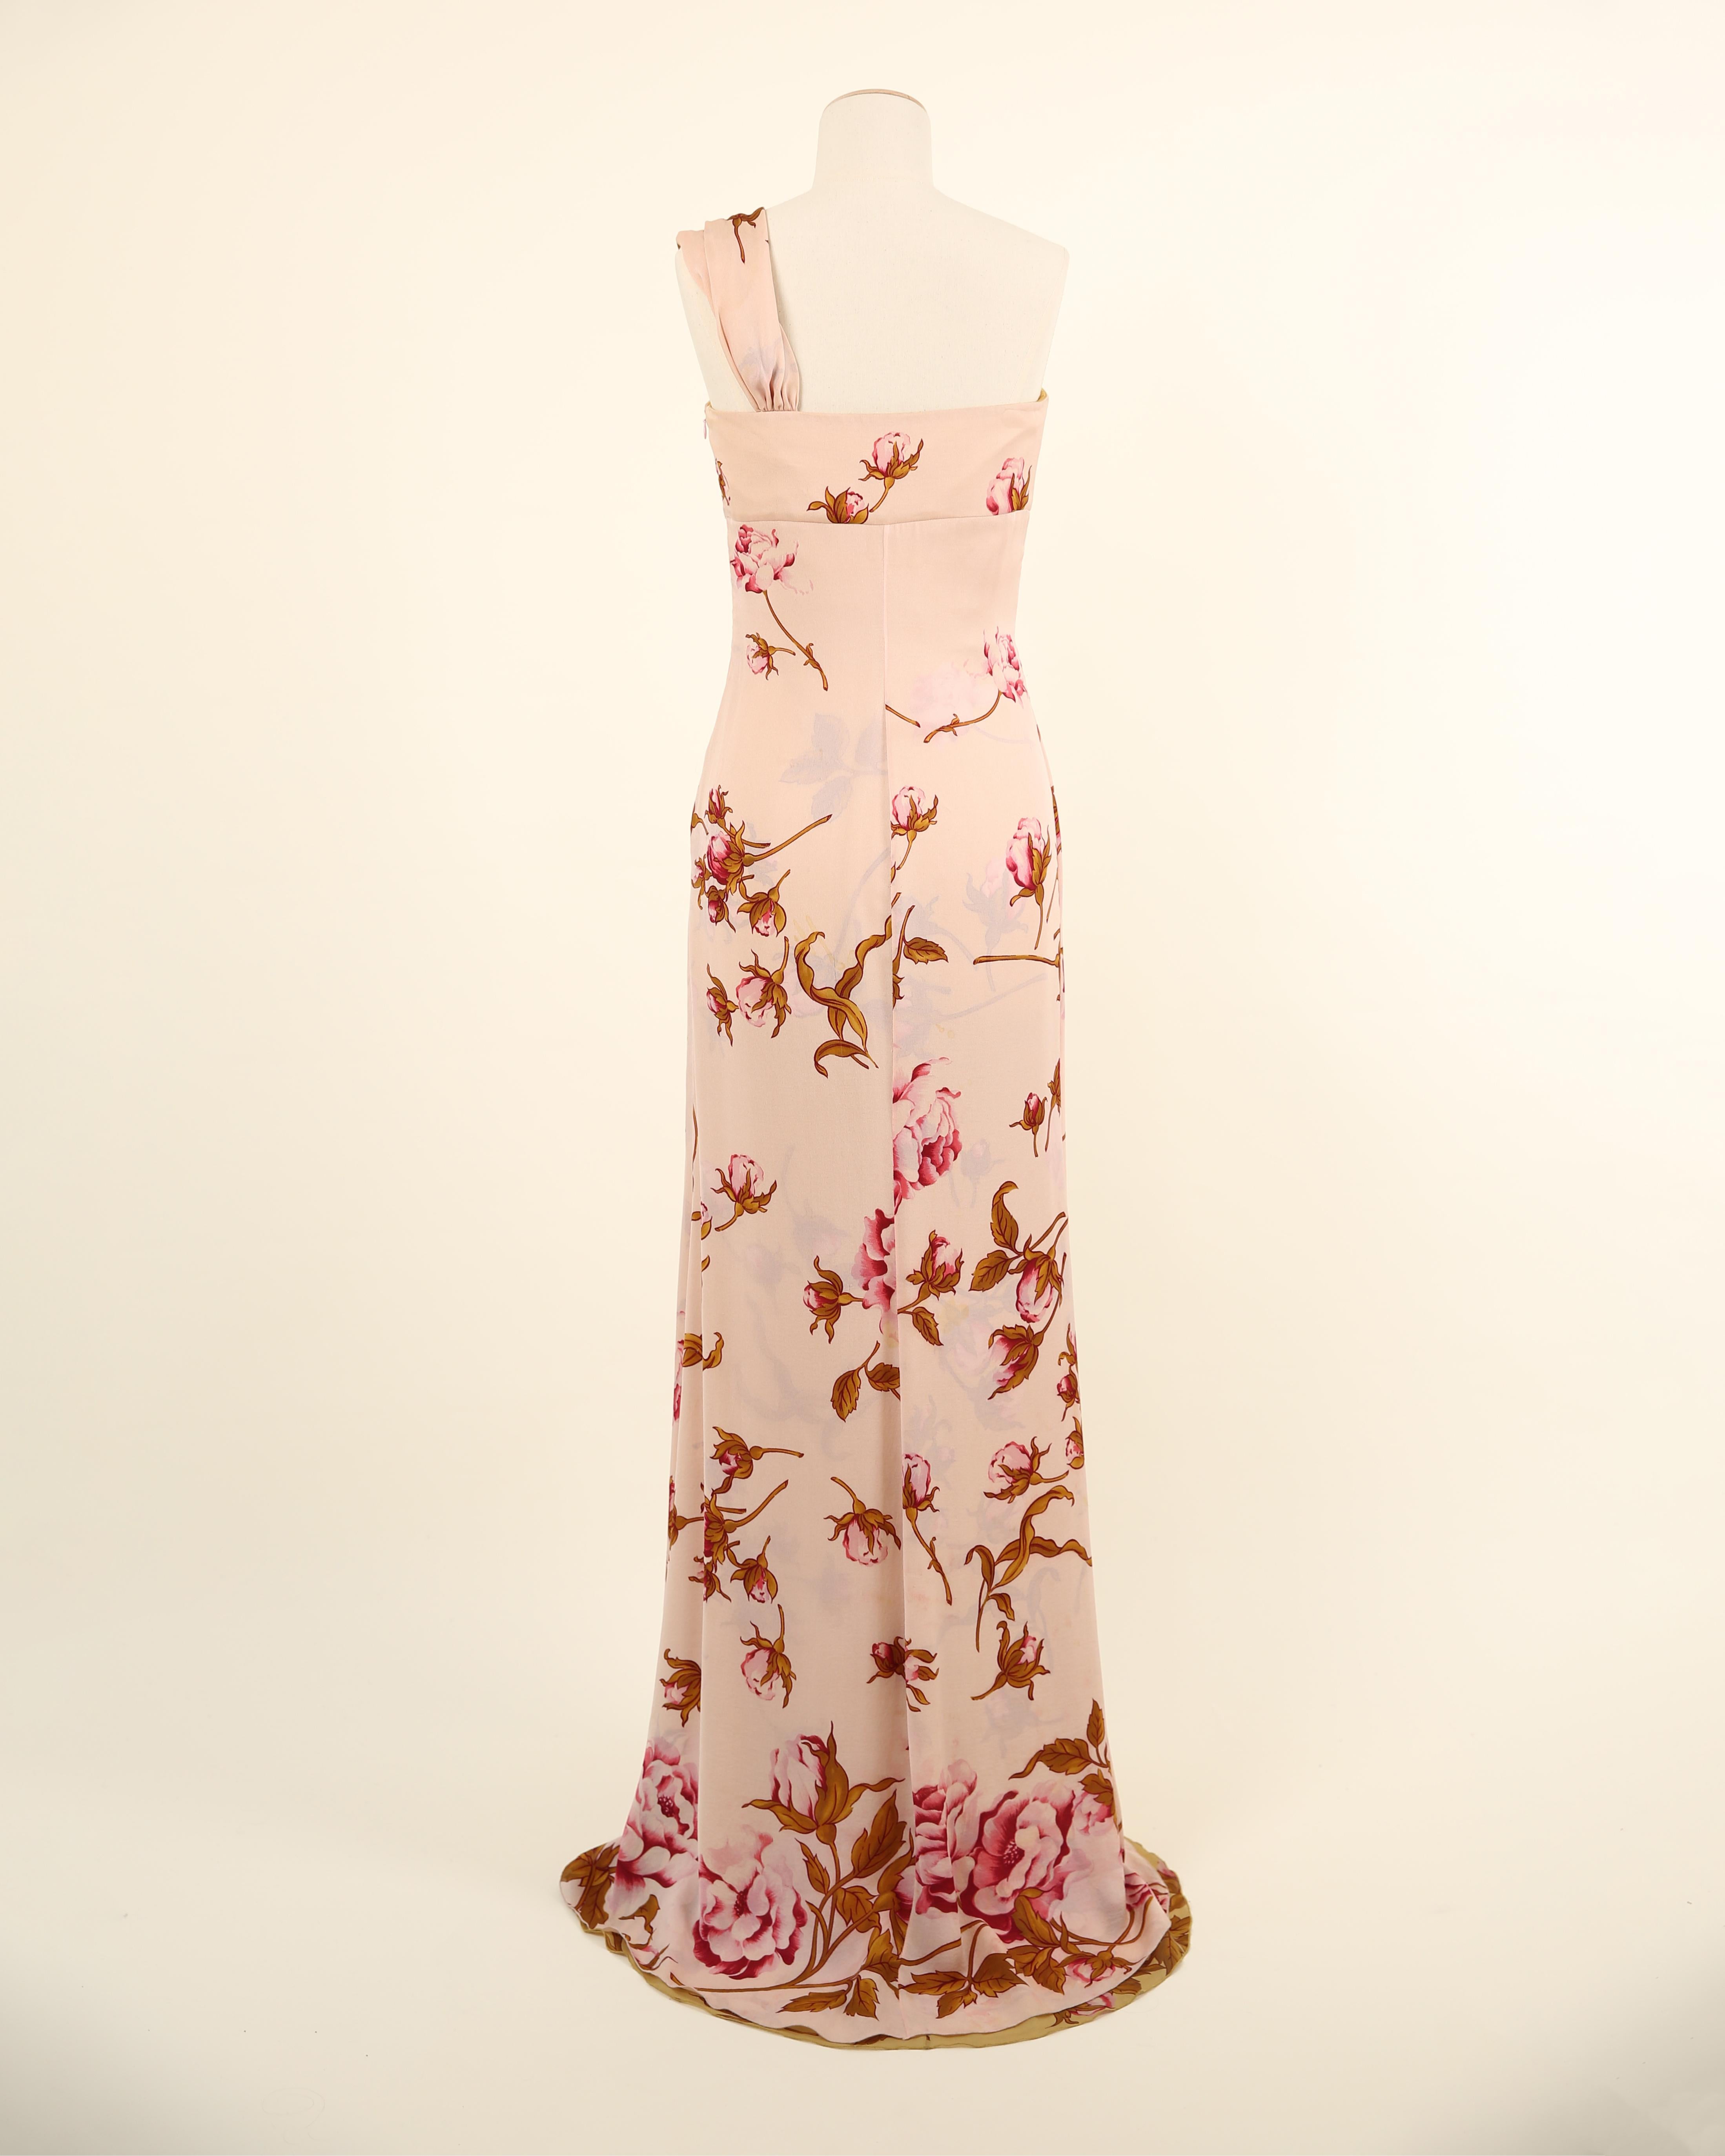 Valentino S/S 06 pink yellow rose print floral one shoulder gown train dress For Sale 7